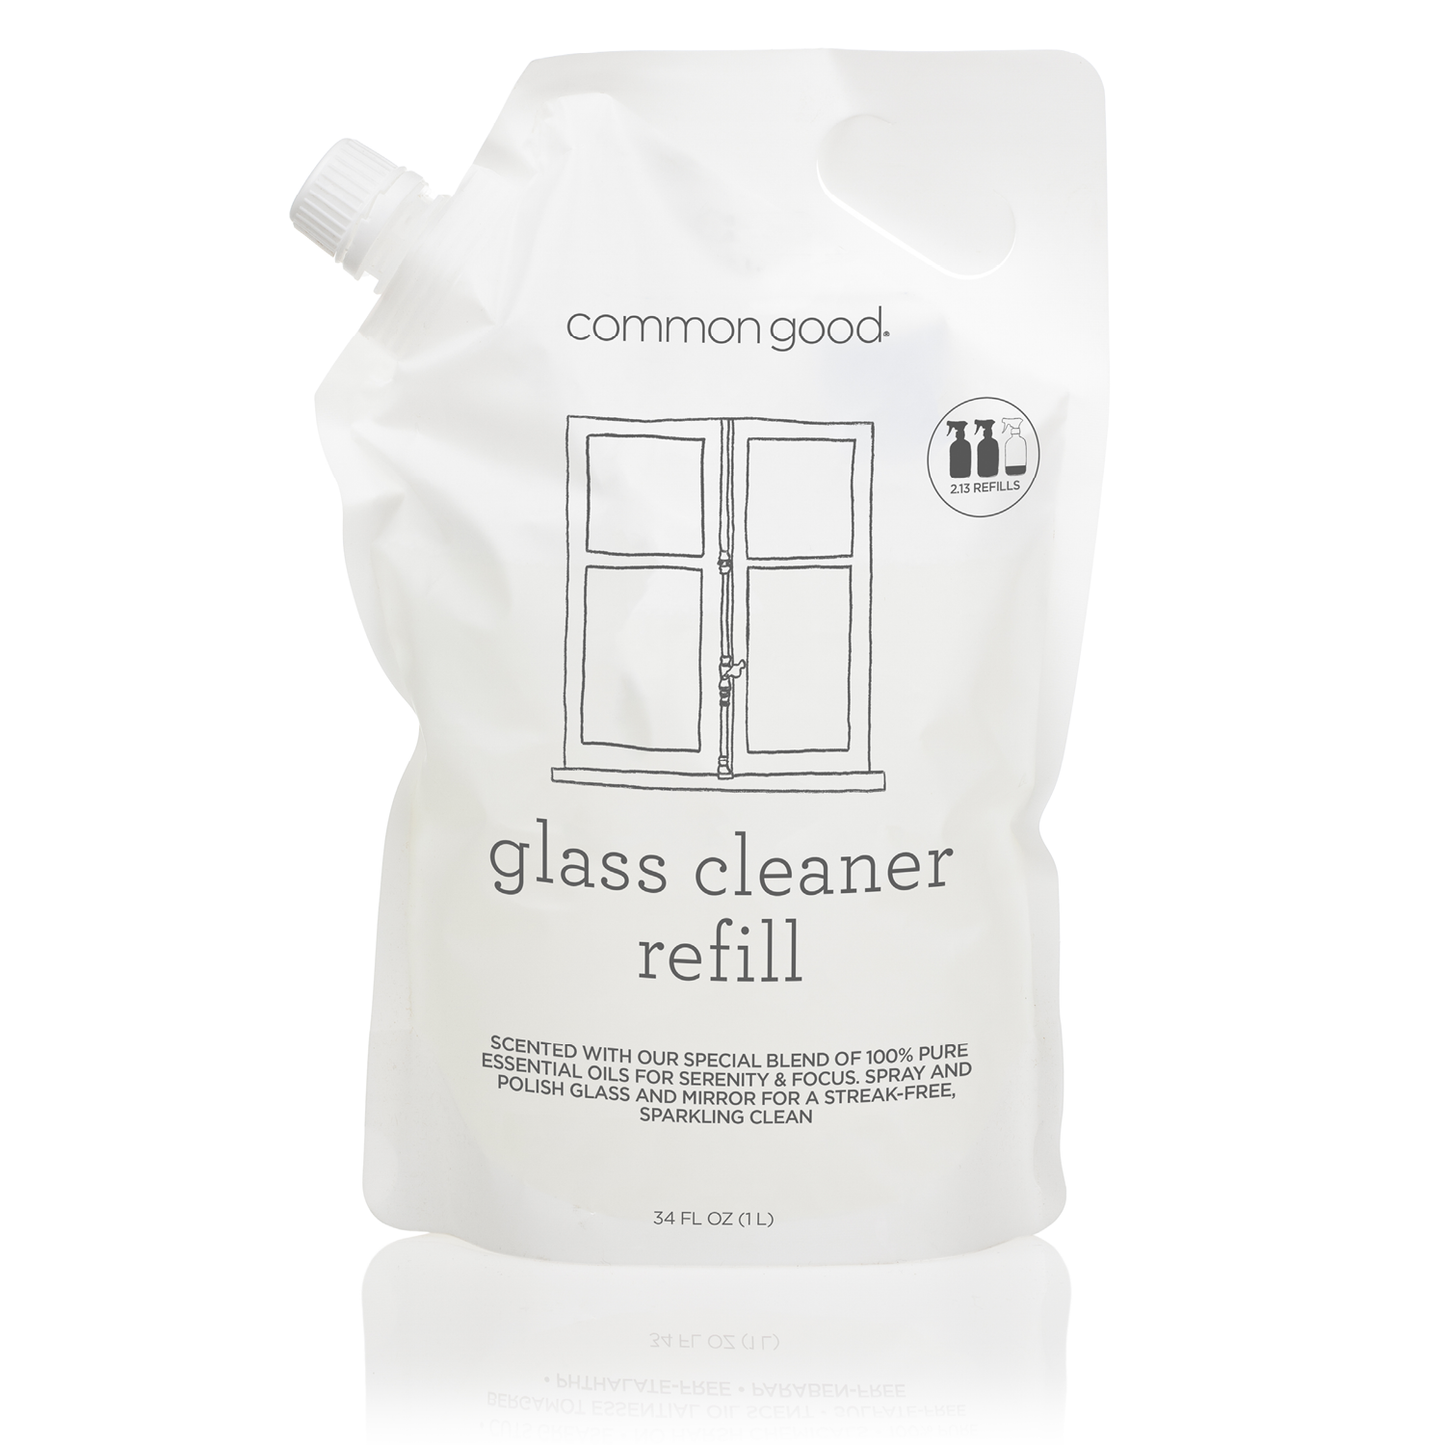 Glass Cleaner Refill Pouch, 34 Fl Oz